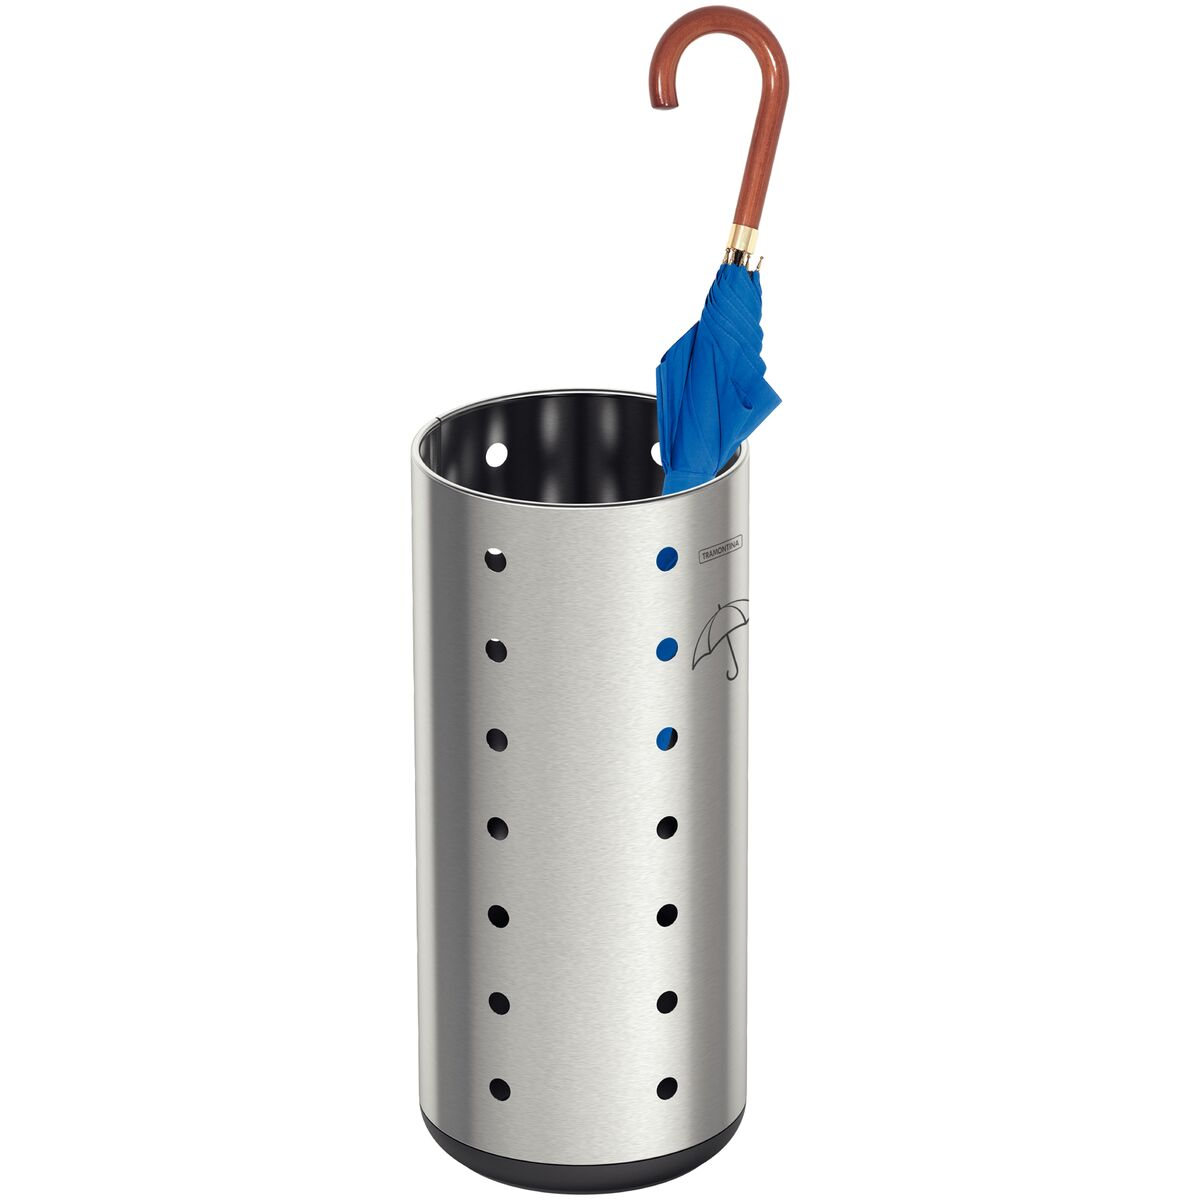 Tramontina 15L stainless steel umbrella stand with a Scotch-Brite finish and polypropylene internal container